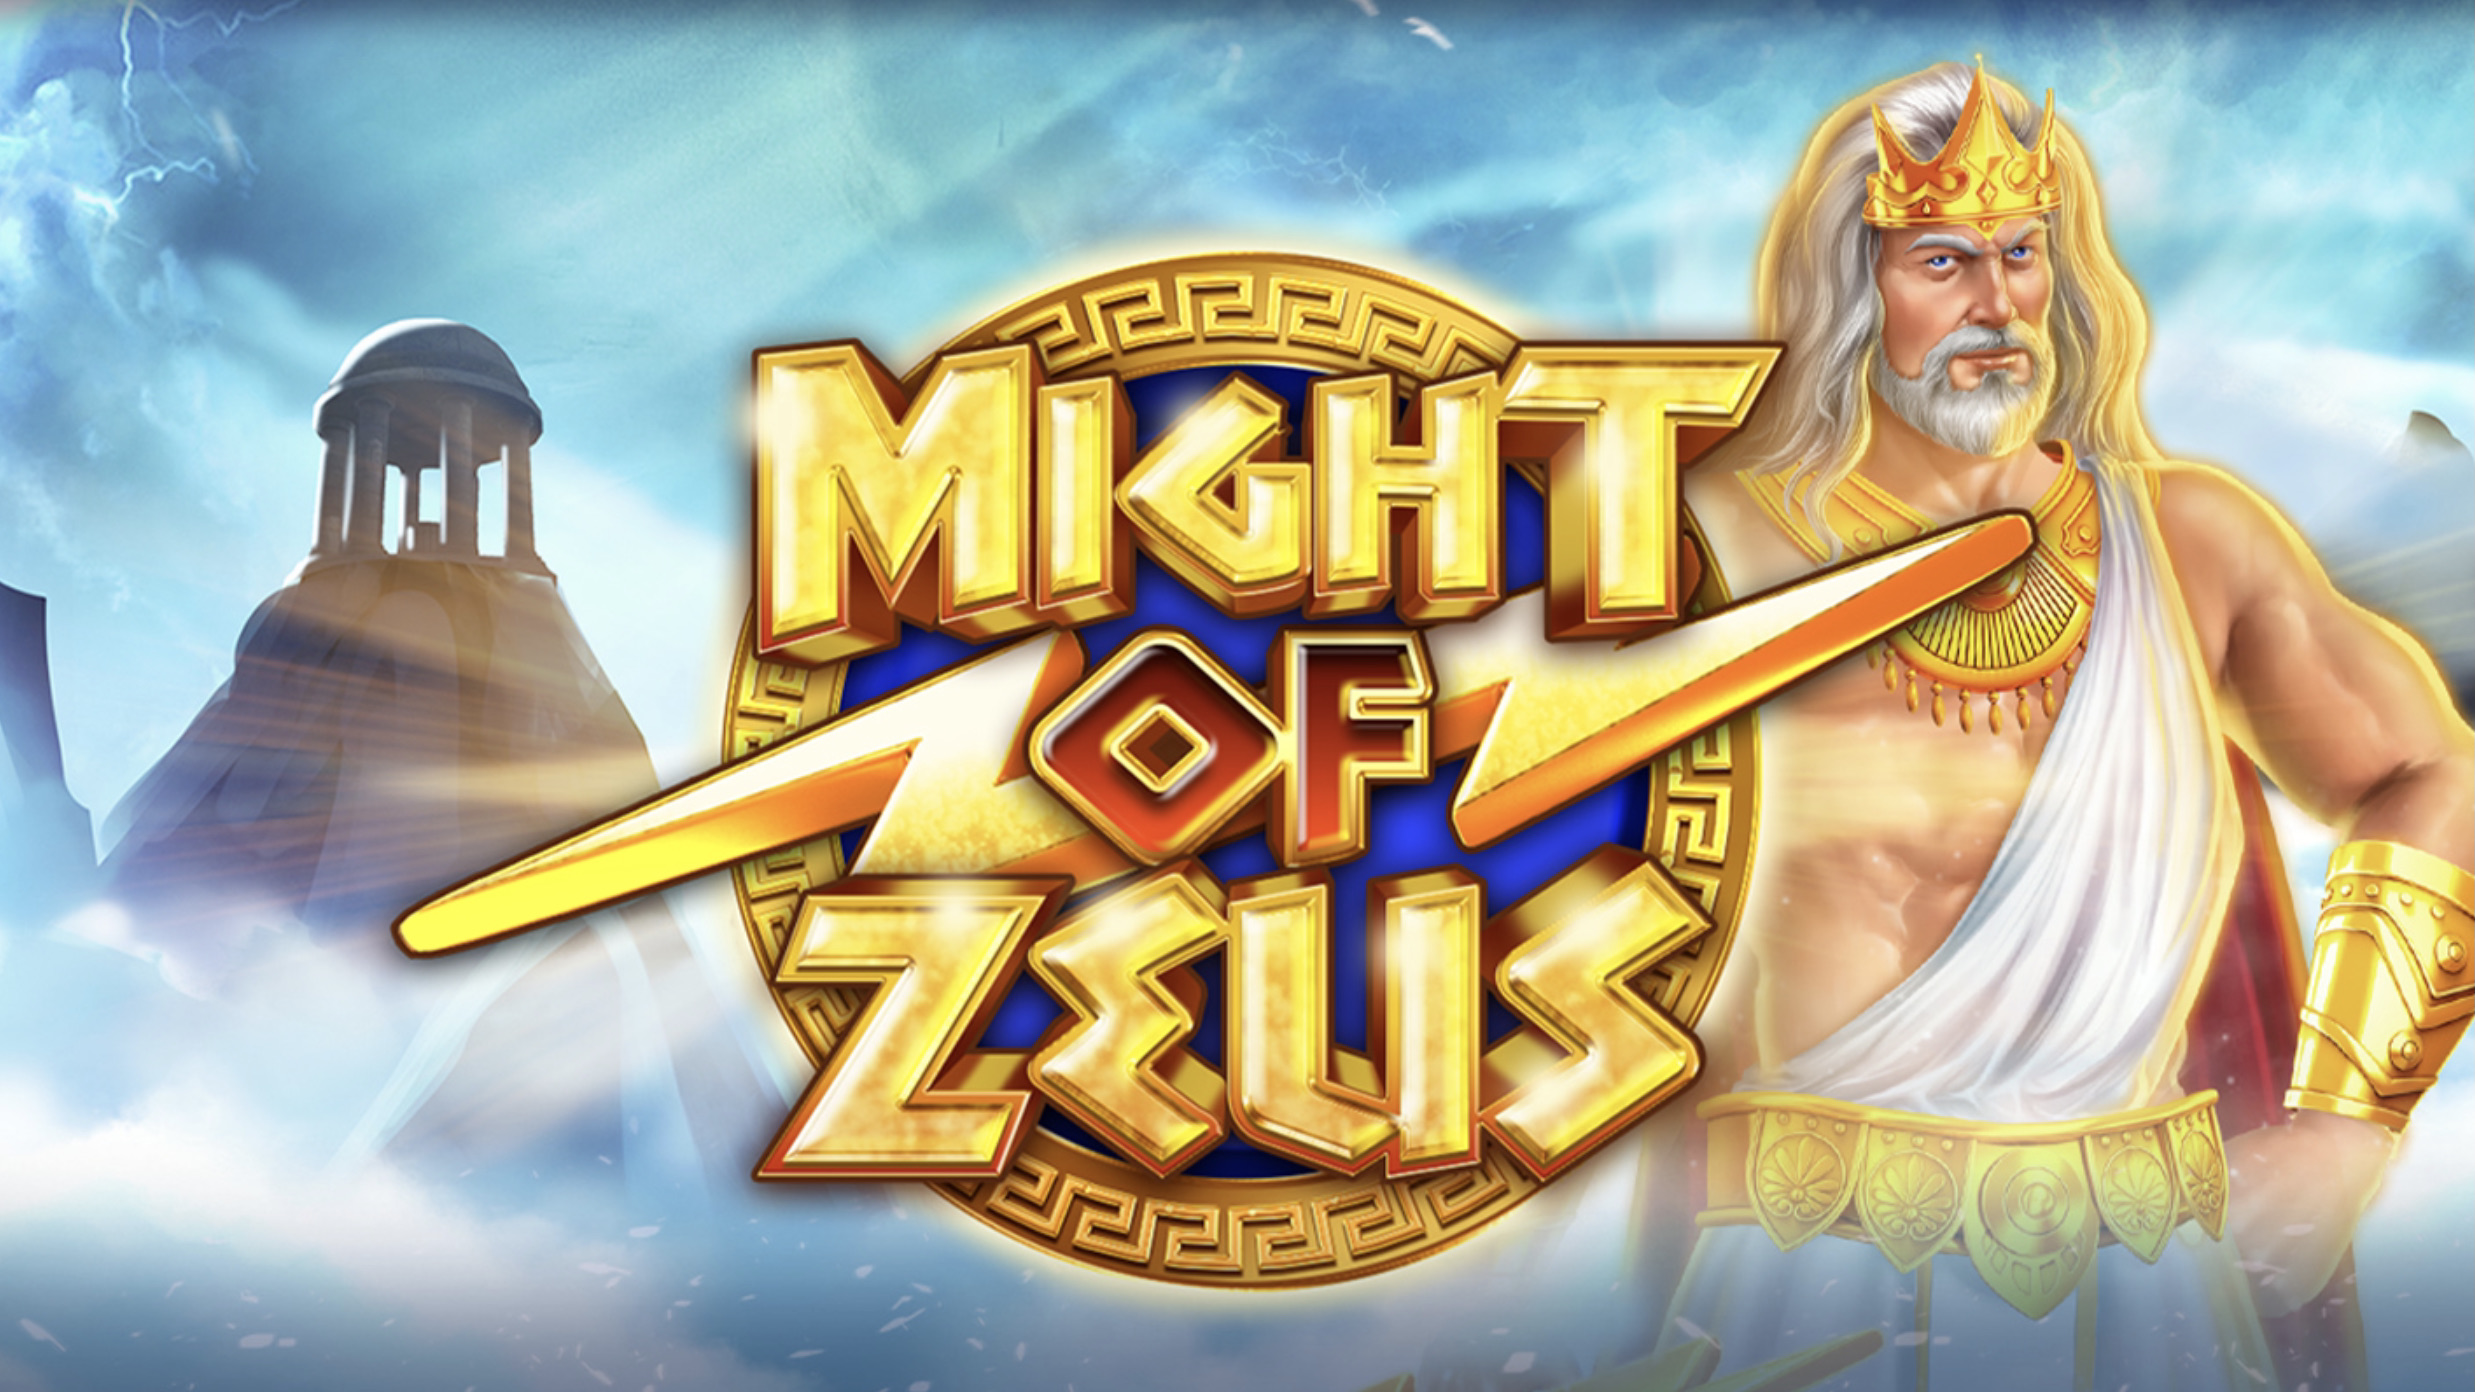 Might of Zeus is a 5x4, 1,024-payline video slot which incorporates a maximum win potential of up to x7,163 the bet.